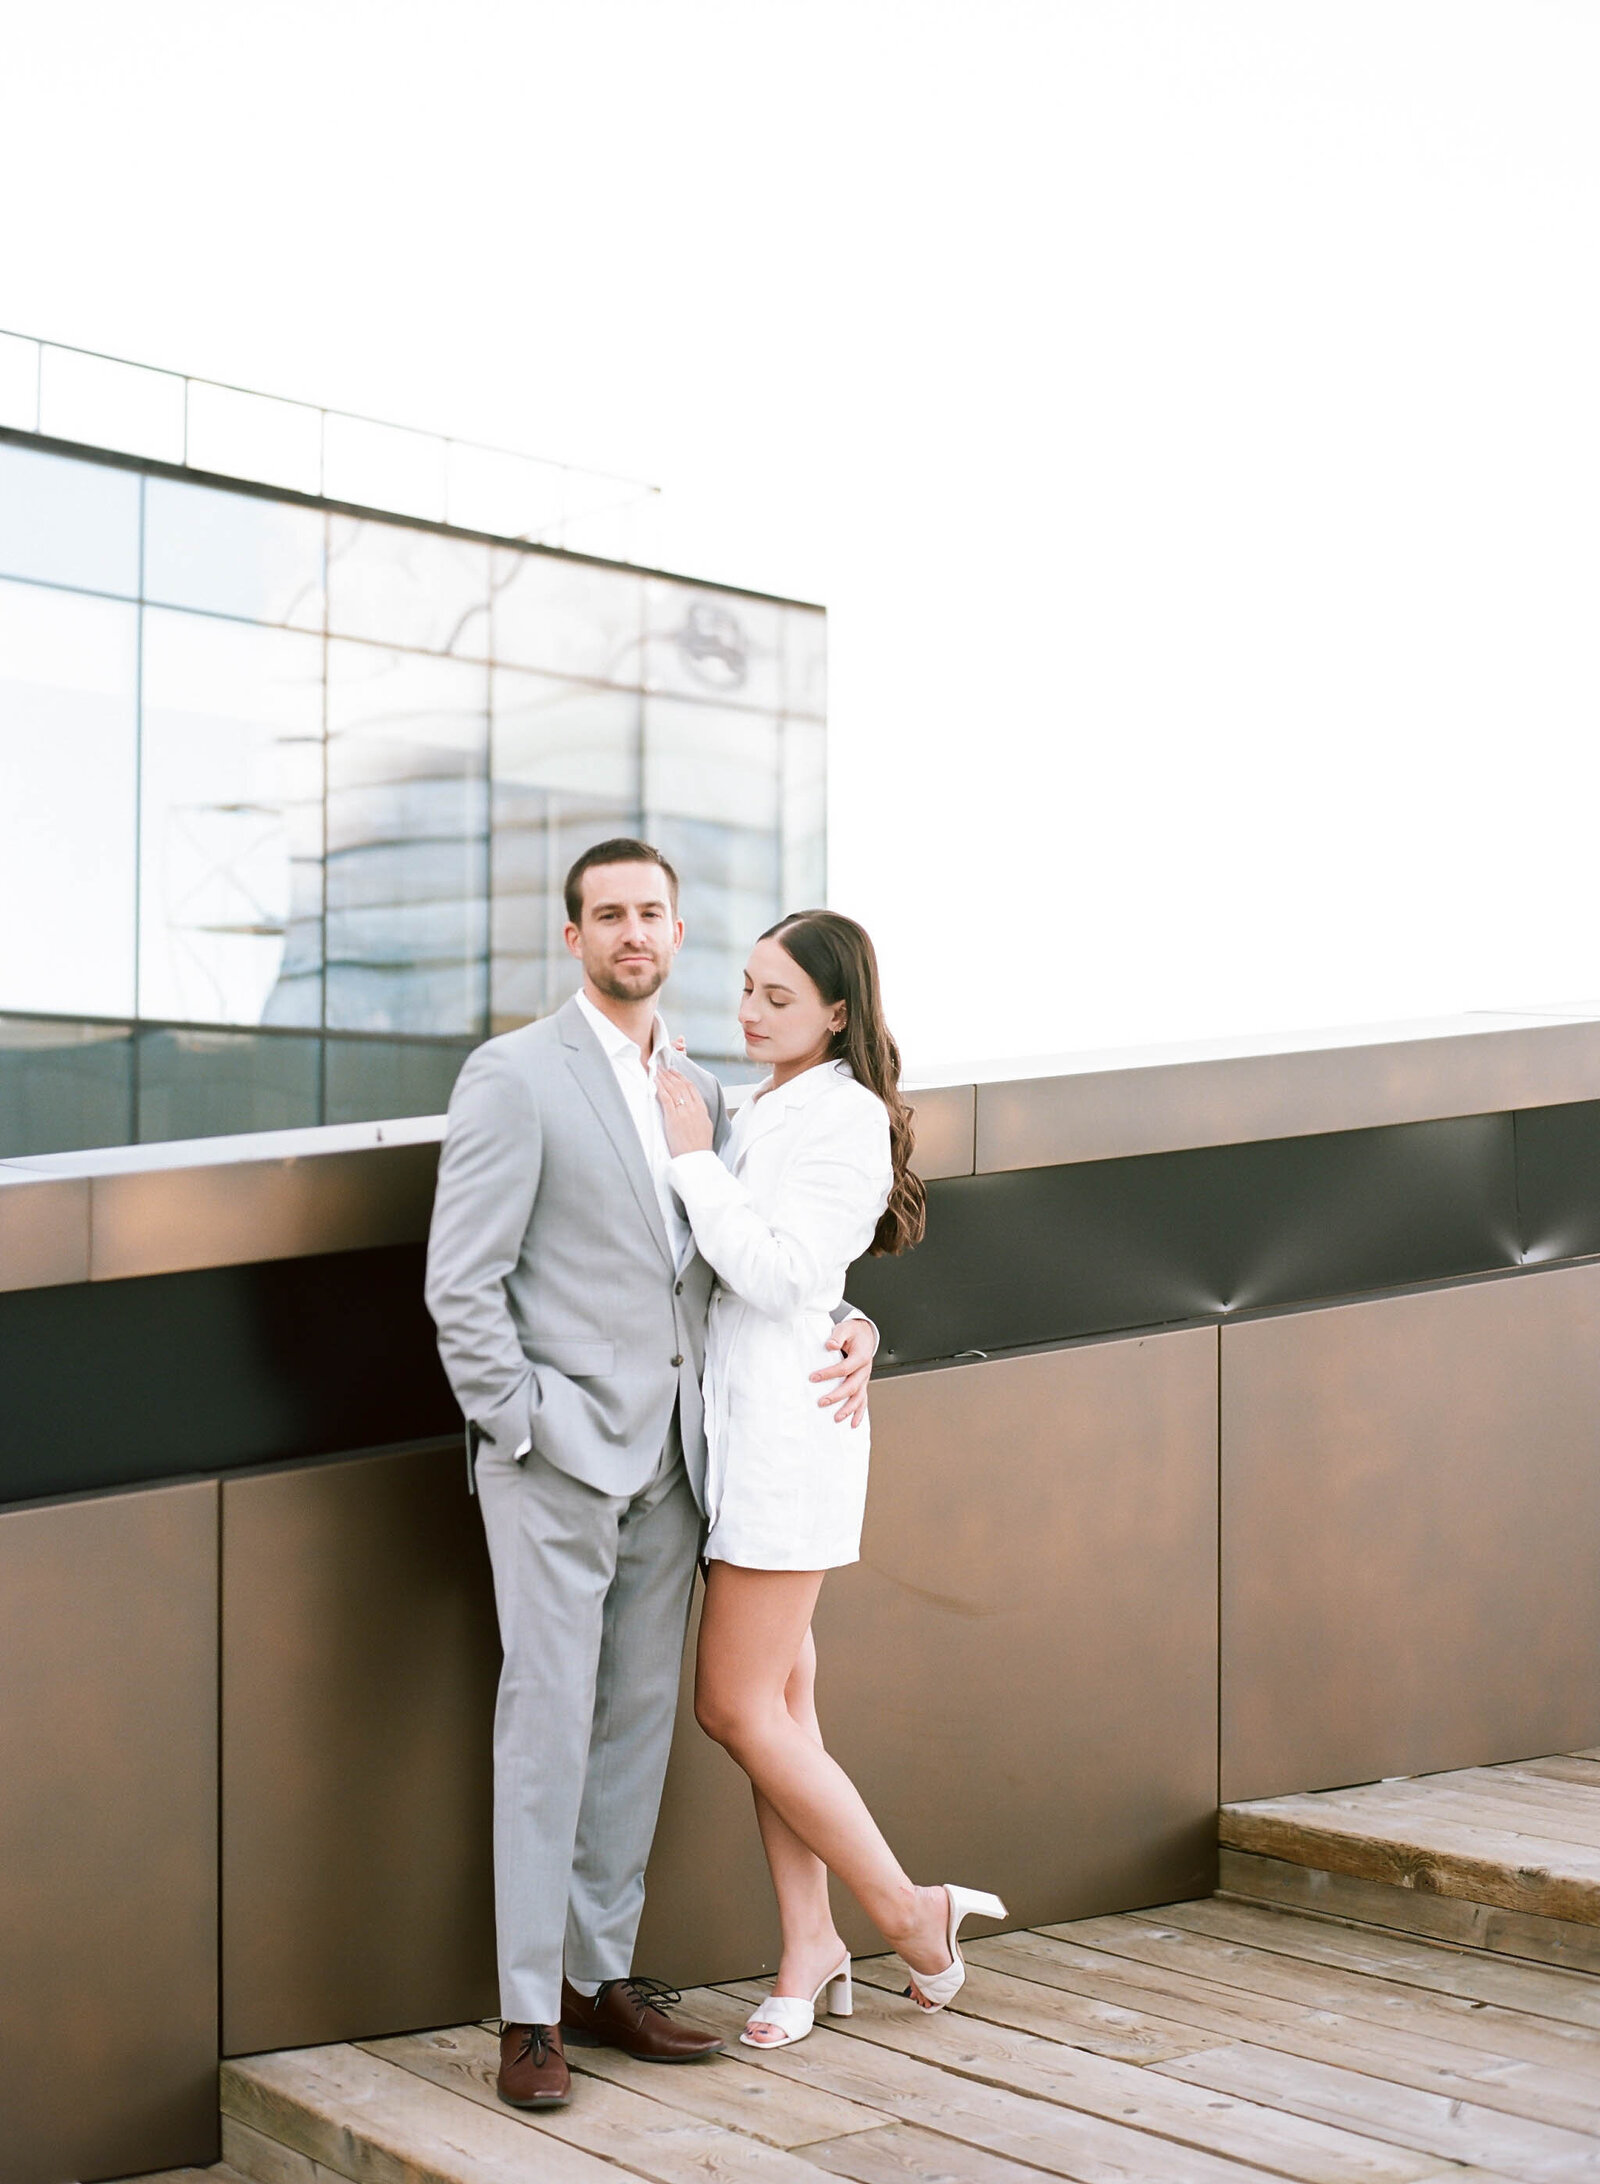 Jacqueline Anne Photography - Halifax Wedding Photographer - Downtown Engagement - Adam and Nicole-62